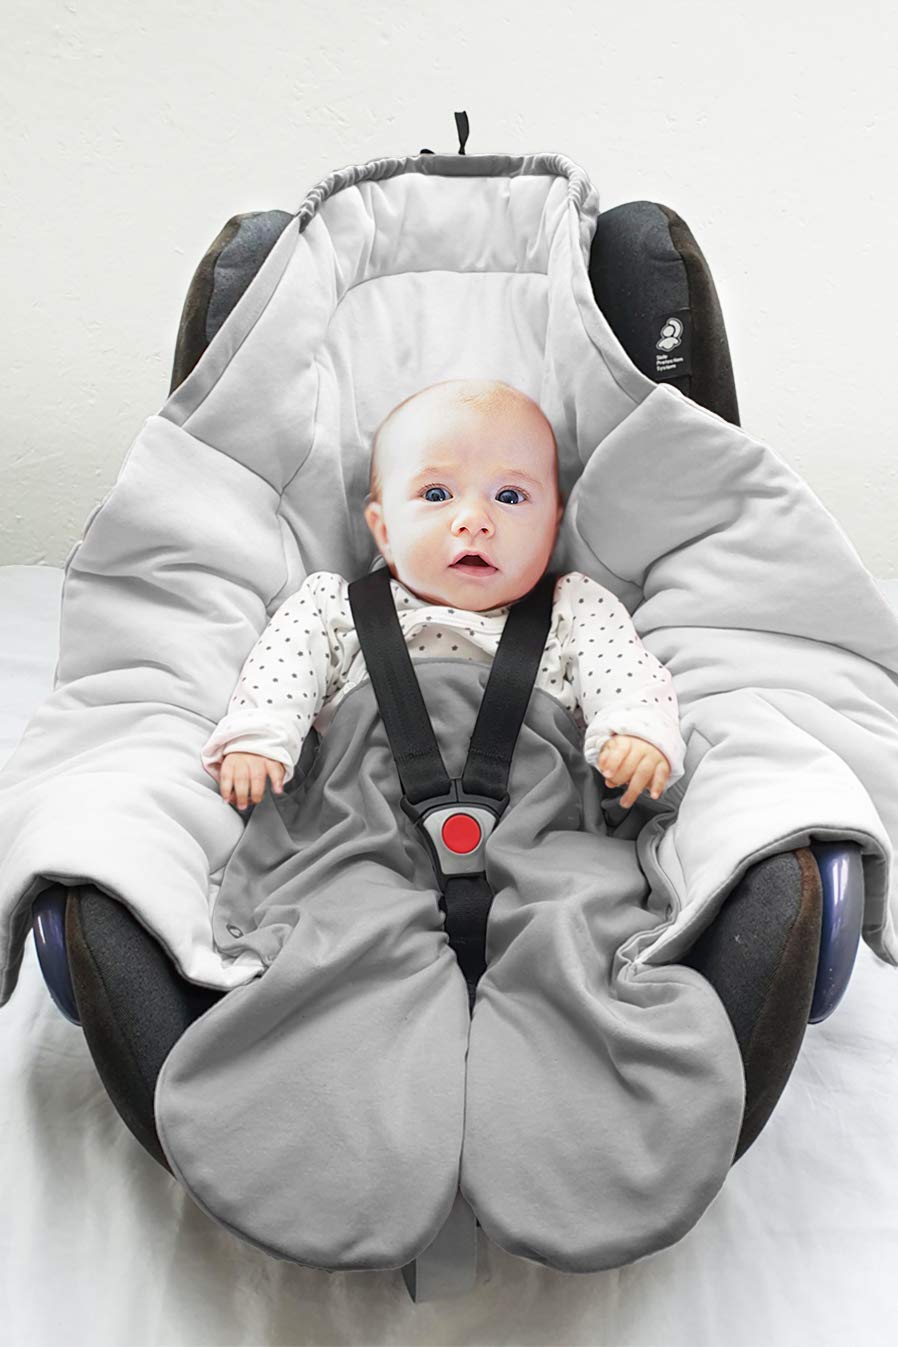 Wallaboo Universal Swaddling Blanket for Baby Seat, Car Seat, e.g. for Maxi-Cosi, Römer, for Pram, Buggy or Cots, Cotton, 96 x 90 cm, 0-10 Months, Colour: Grey/Silver